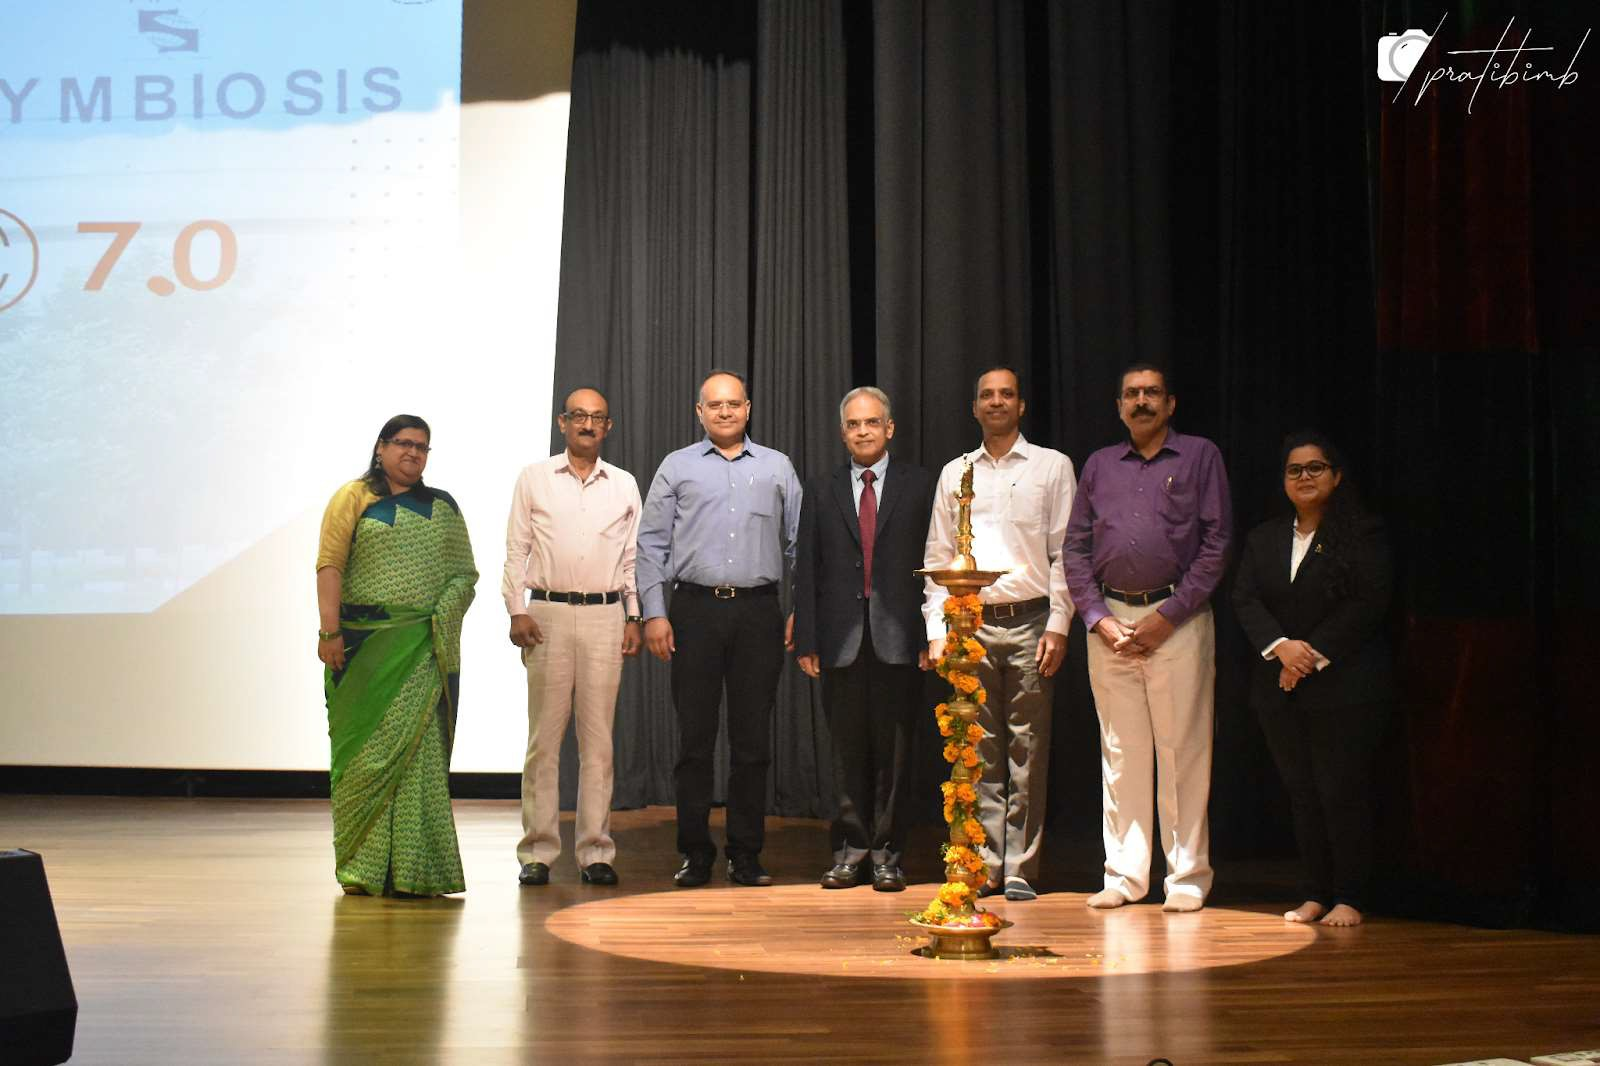 Ceremonial Lighting of the lamp by Dr. K.P. Venugopala Rao, Dr. Shyamsunder Chitta, Dr. Ridhi Rani and the distinguished dignitaries present for the event Mr. Ankur Chaturvedi, Associate Vice President - Business Excellence & Quality at Emami Ltd., Dr. Rajesh Parekh, Resilience Coach at Resilient Leadership, Mr. Tarun Srivastava, the chief manager at Polycab Support Force and Ms. Asmita Arjun Dalvi .
 